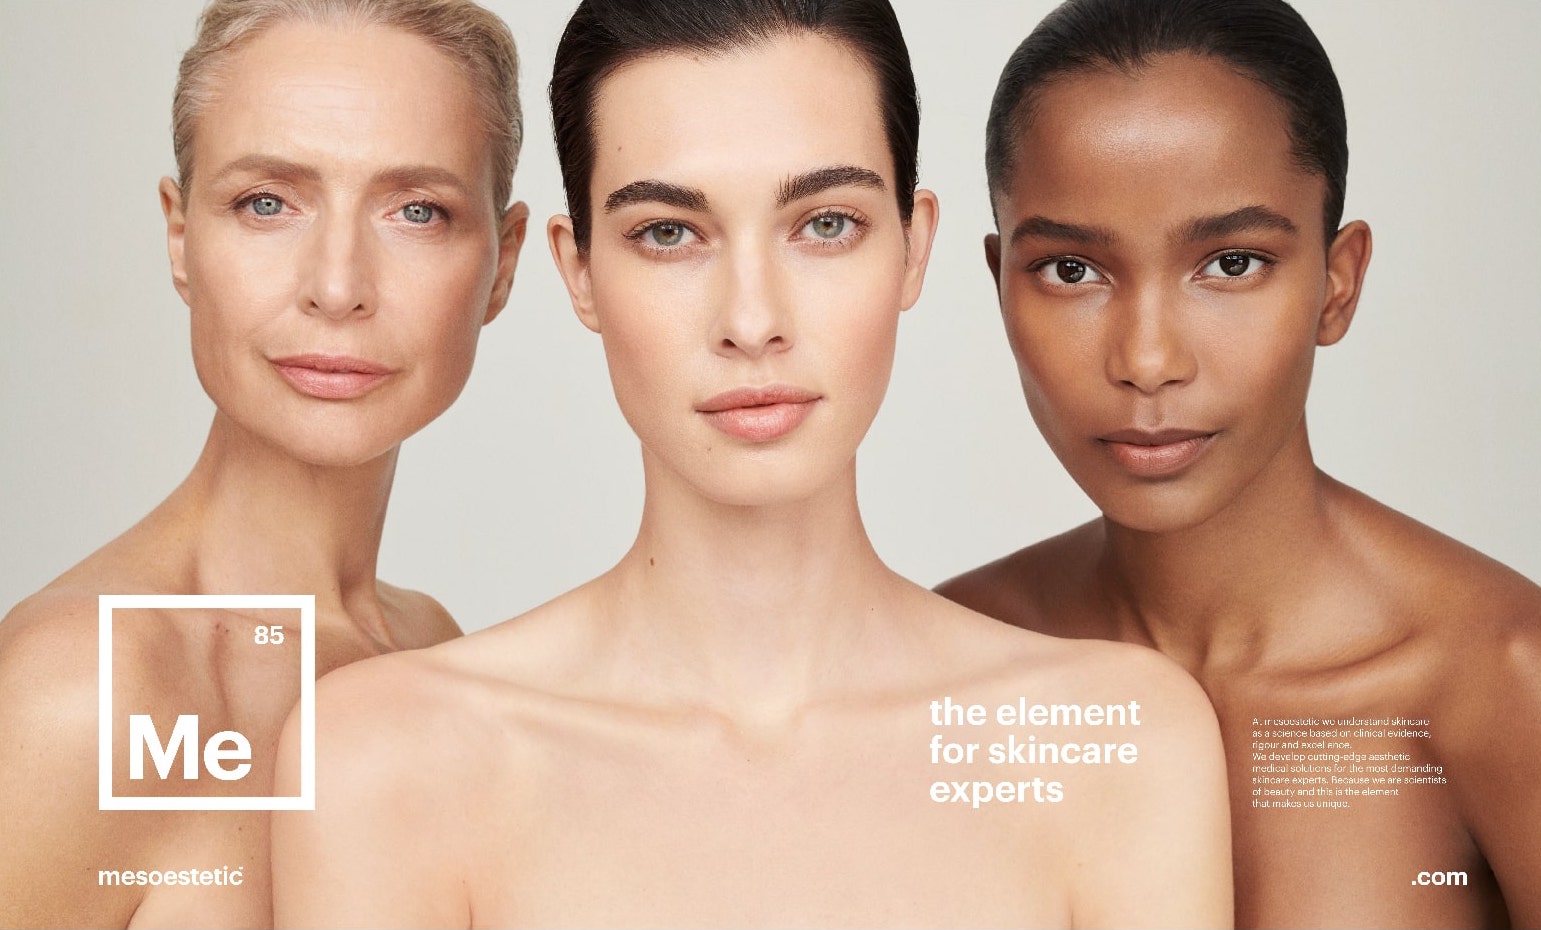 3 women with very clean and clear skin looking into the camera